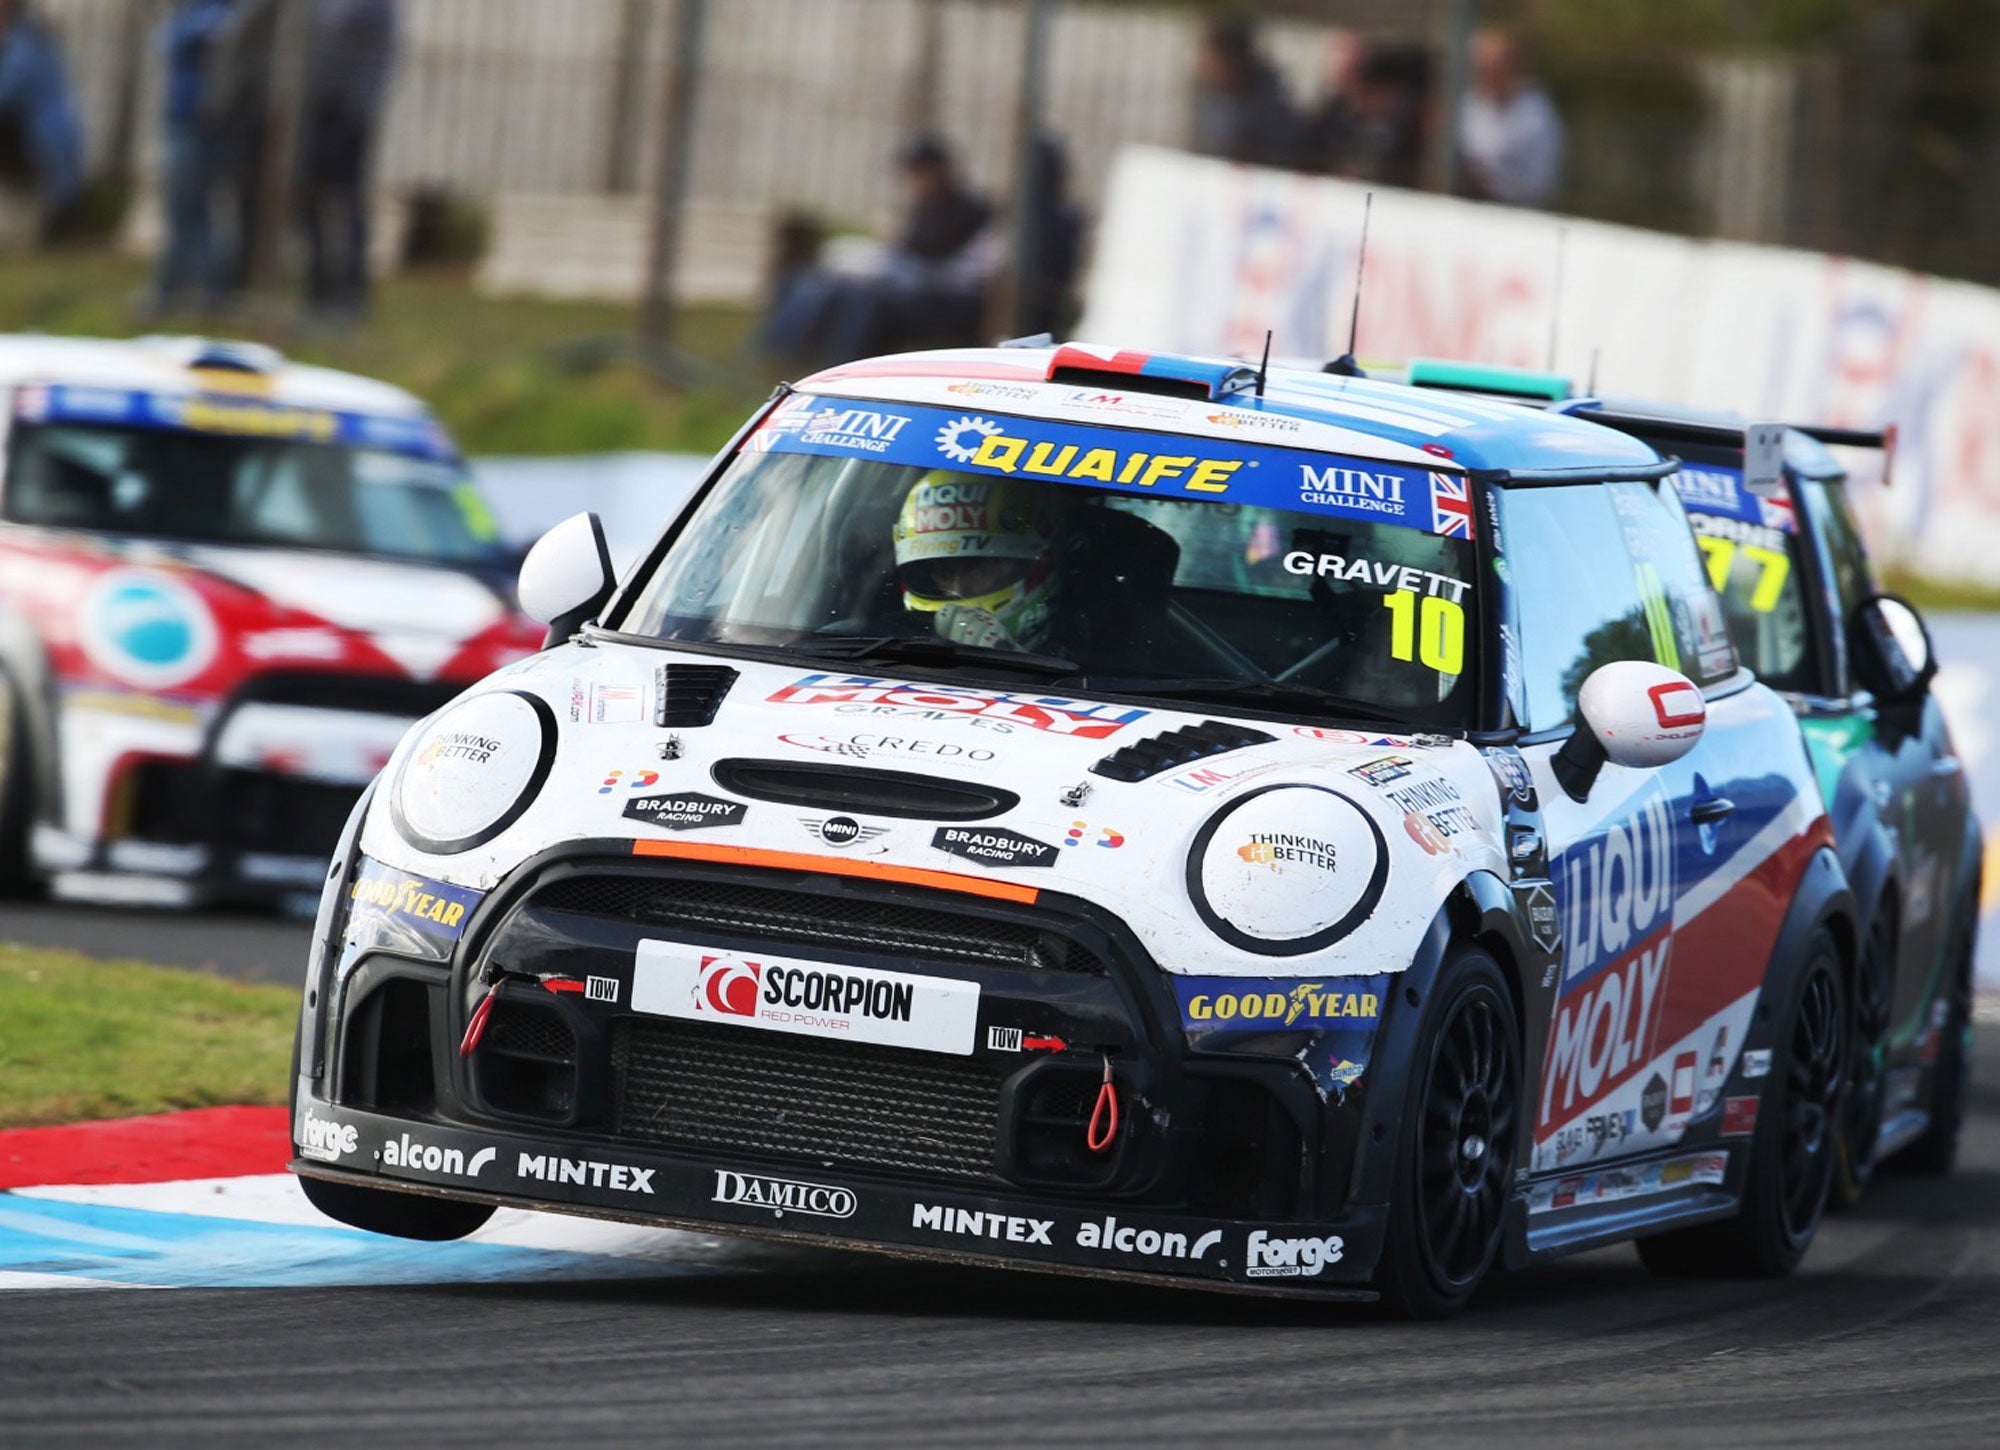 Bradley Gravett son of BTCC British Touring Car Champion Robb Gravett in the MINI Challenge JCW Series at Knockhill in 2022 Turn 3 on 2 Wheels on The Curb Graves Motorsport Cooper Racing Driver LIQUI MOLY LM Performance Thinking it Better